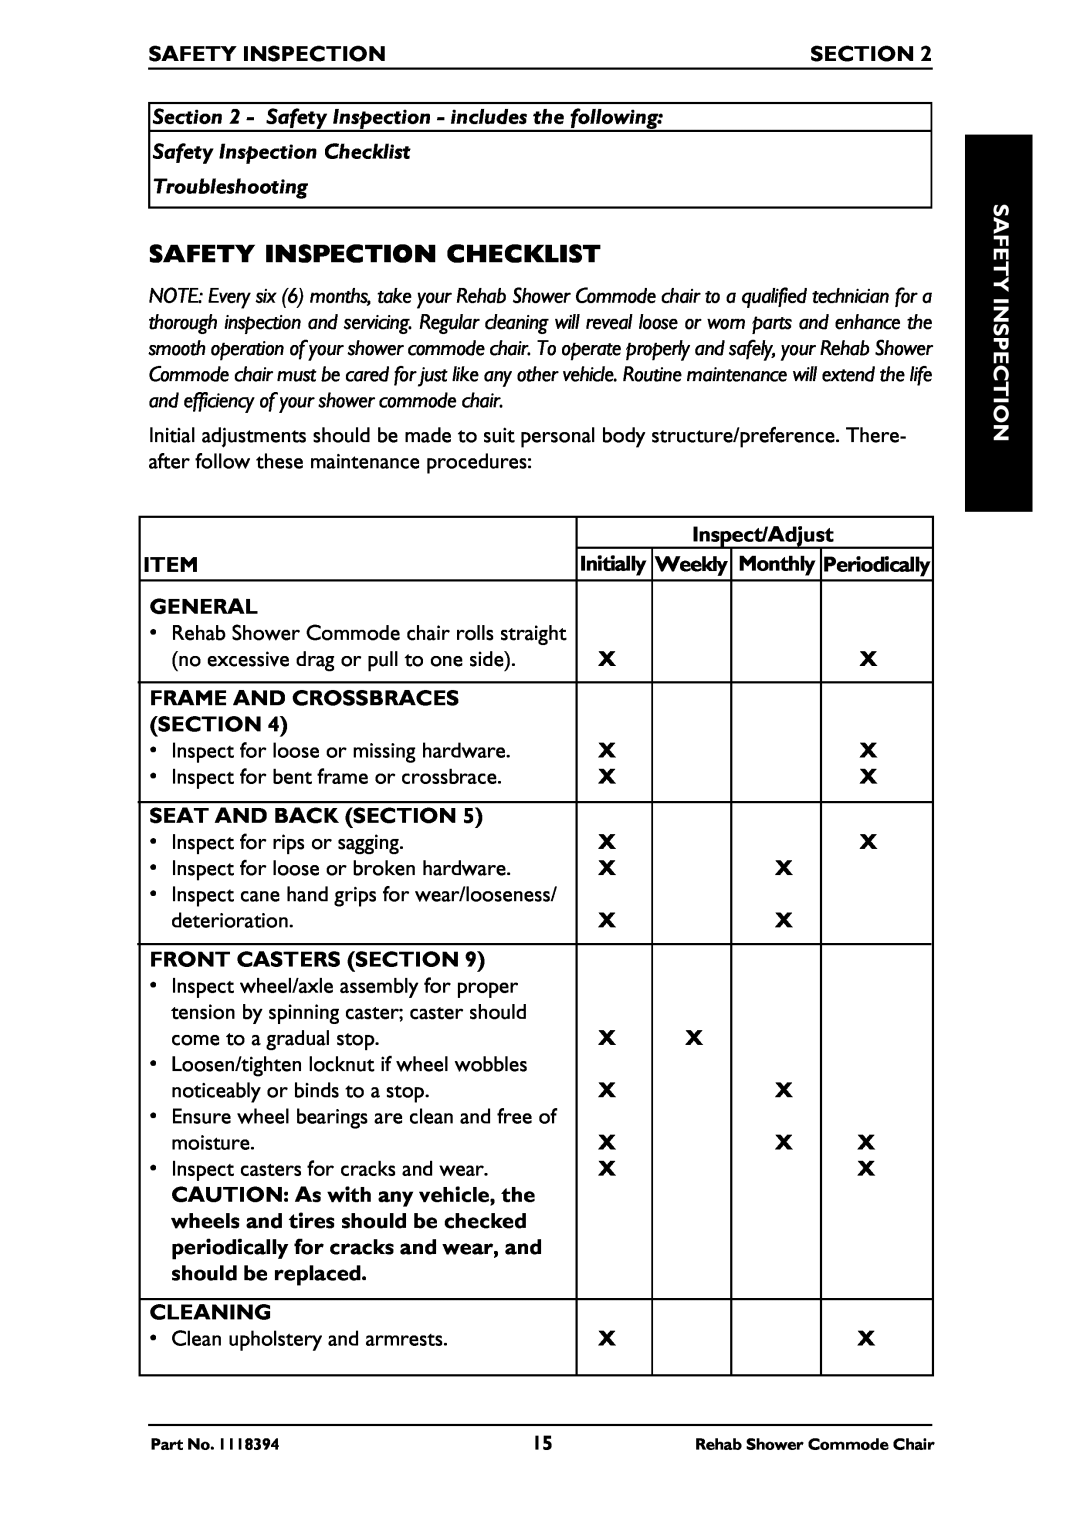 Invacare 6795 Safety Inspection Checklist, Section, Safety Inspection - includes the following, Inspect/Adjust, Initially 